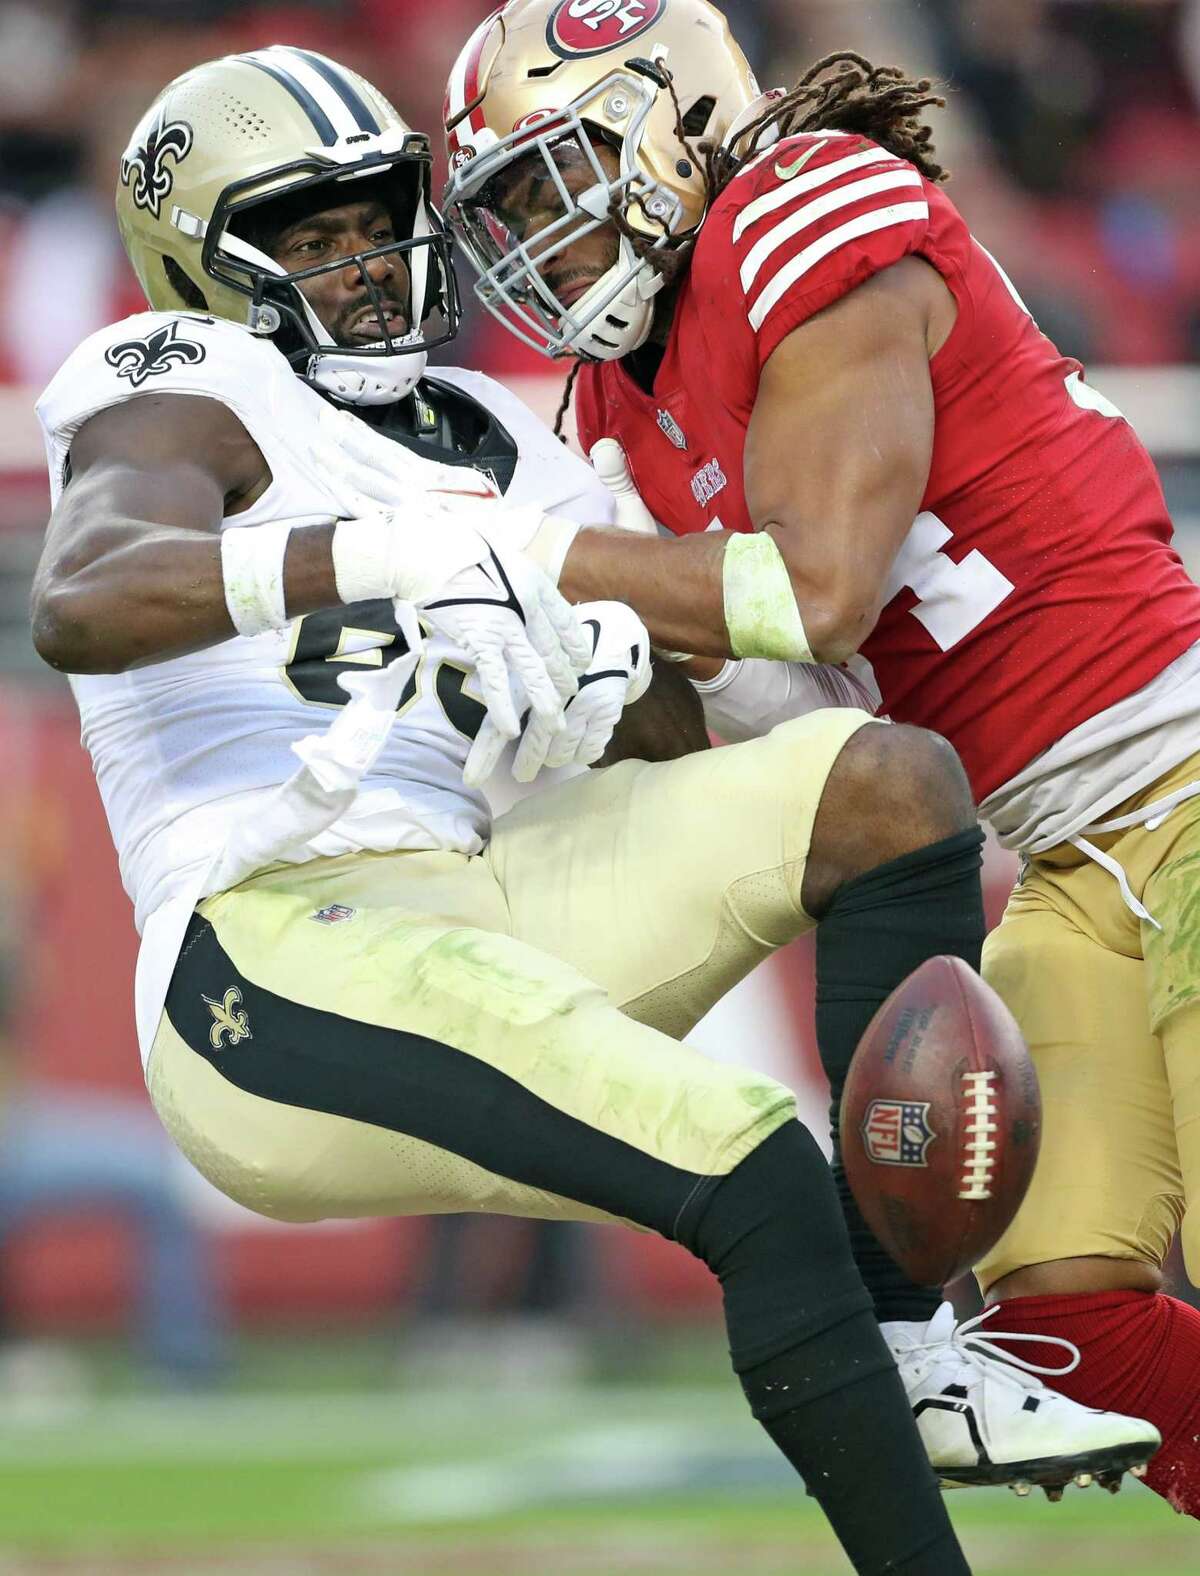 San Francisco 49ers’ Fred Warner breaks up a pass intended for New Orleans Saints’ Juwan Johnson during Niners’ 13-0 win in NFL game at Levi’s Stadium in Santa Clara, Calif., on Sunday, November 27, 2022.